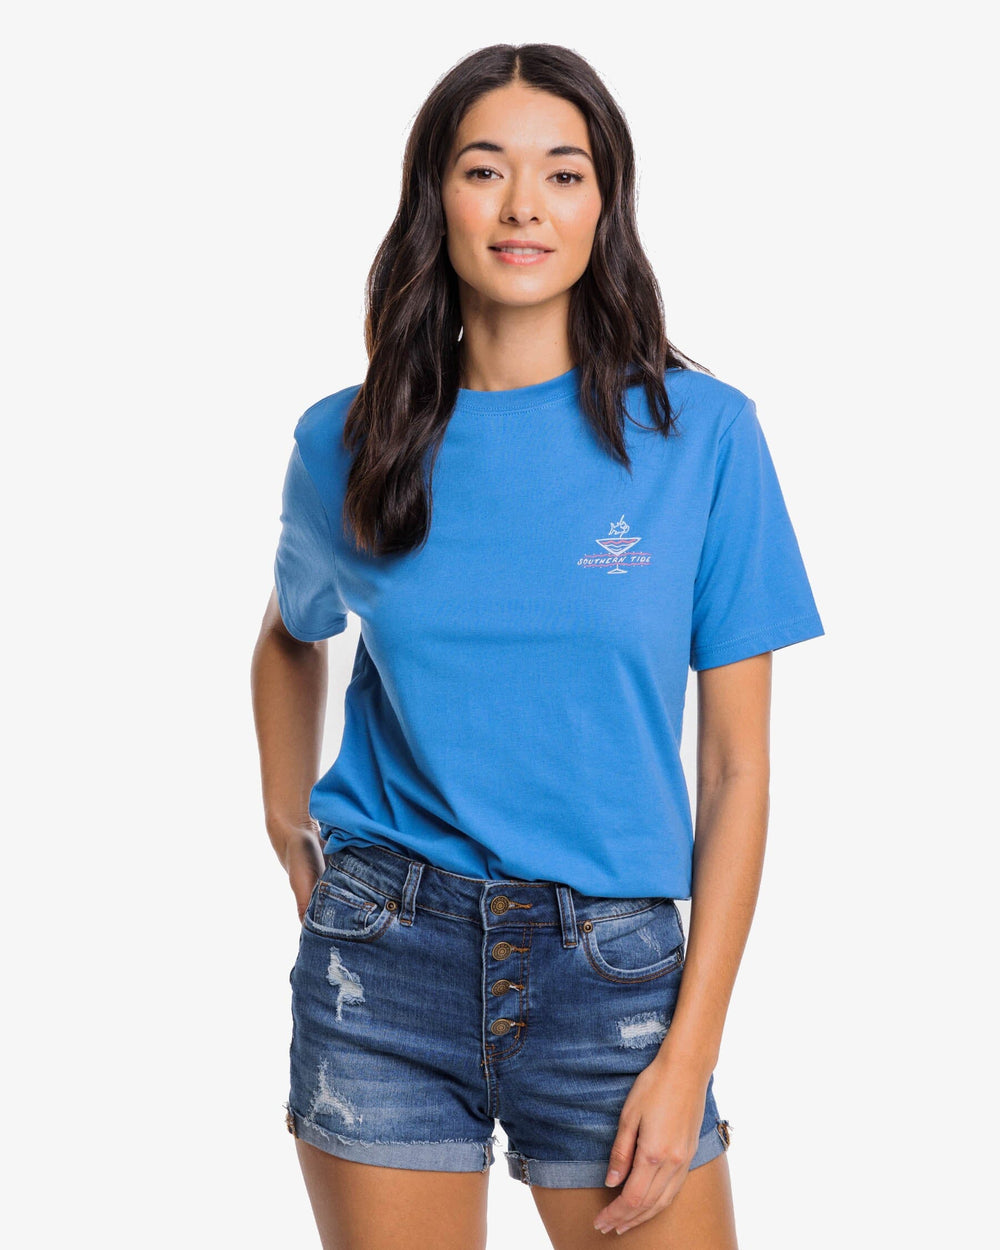 The front view of the Southern Tide Firework Flight T-shirt by Southern Tide - Atlantic Blue